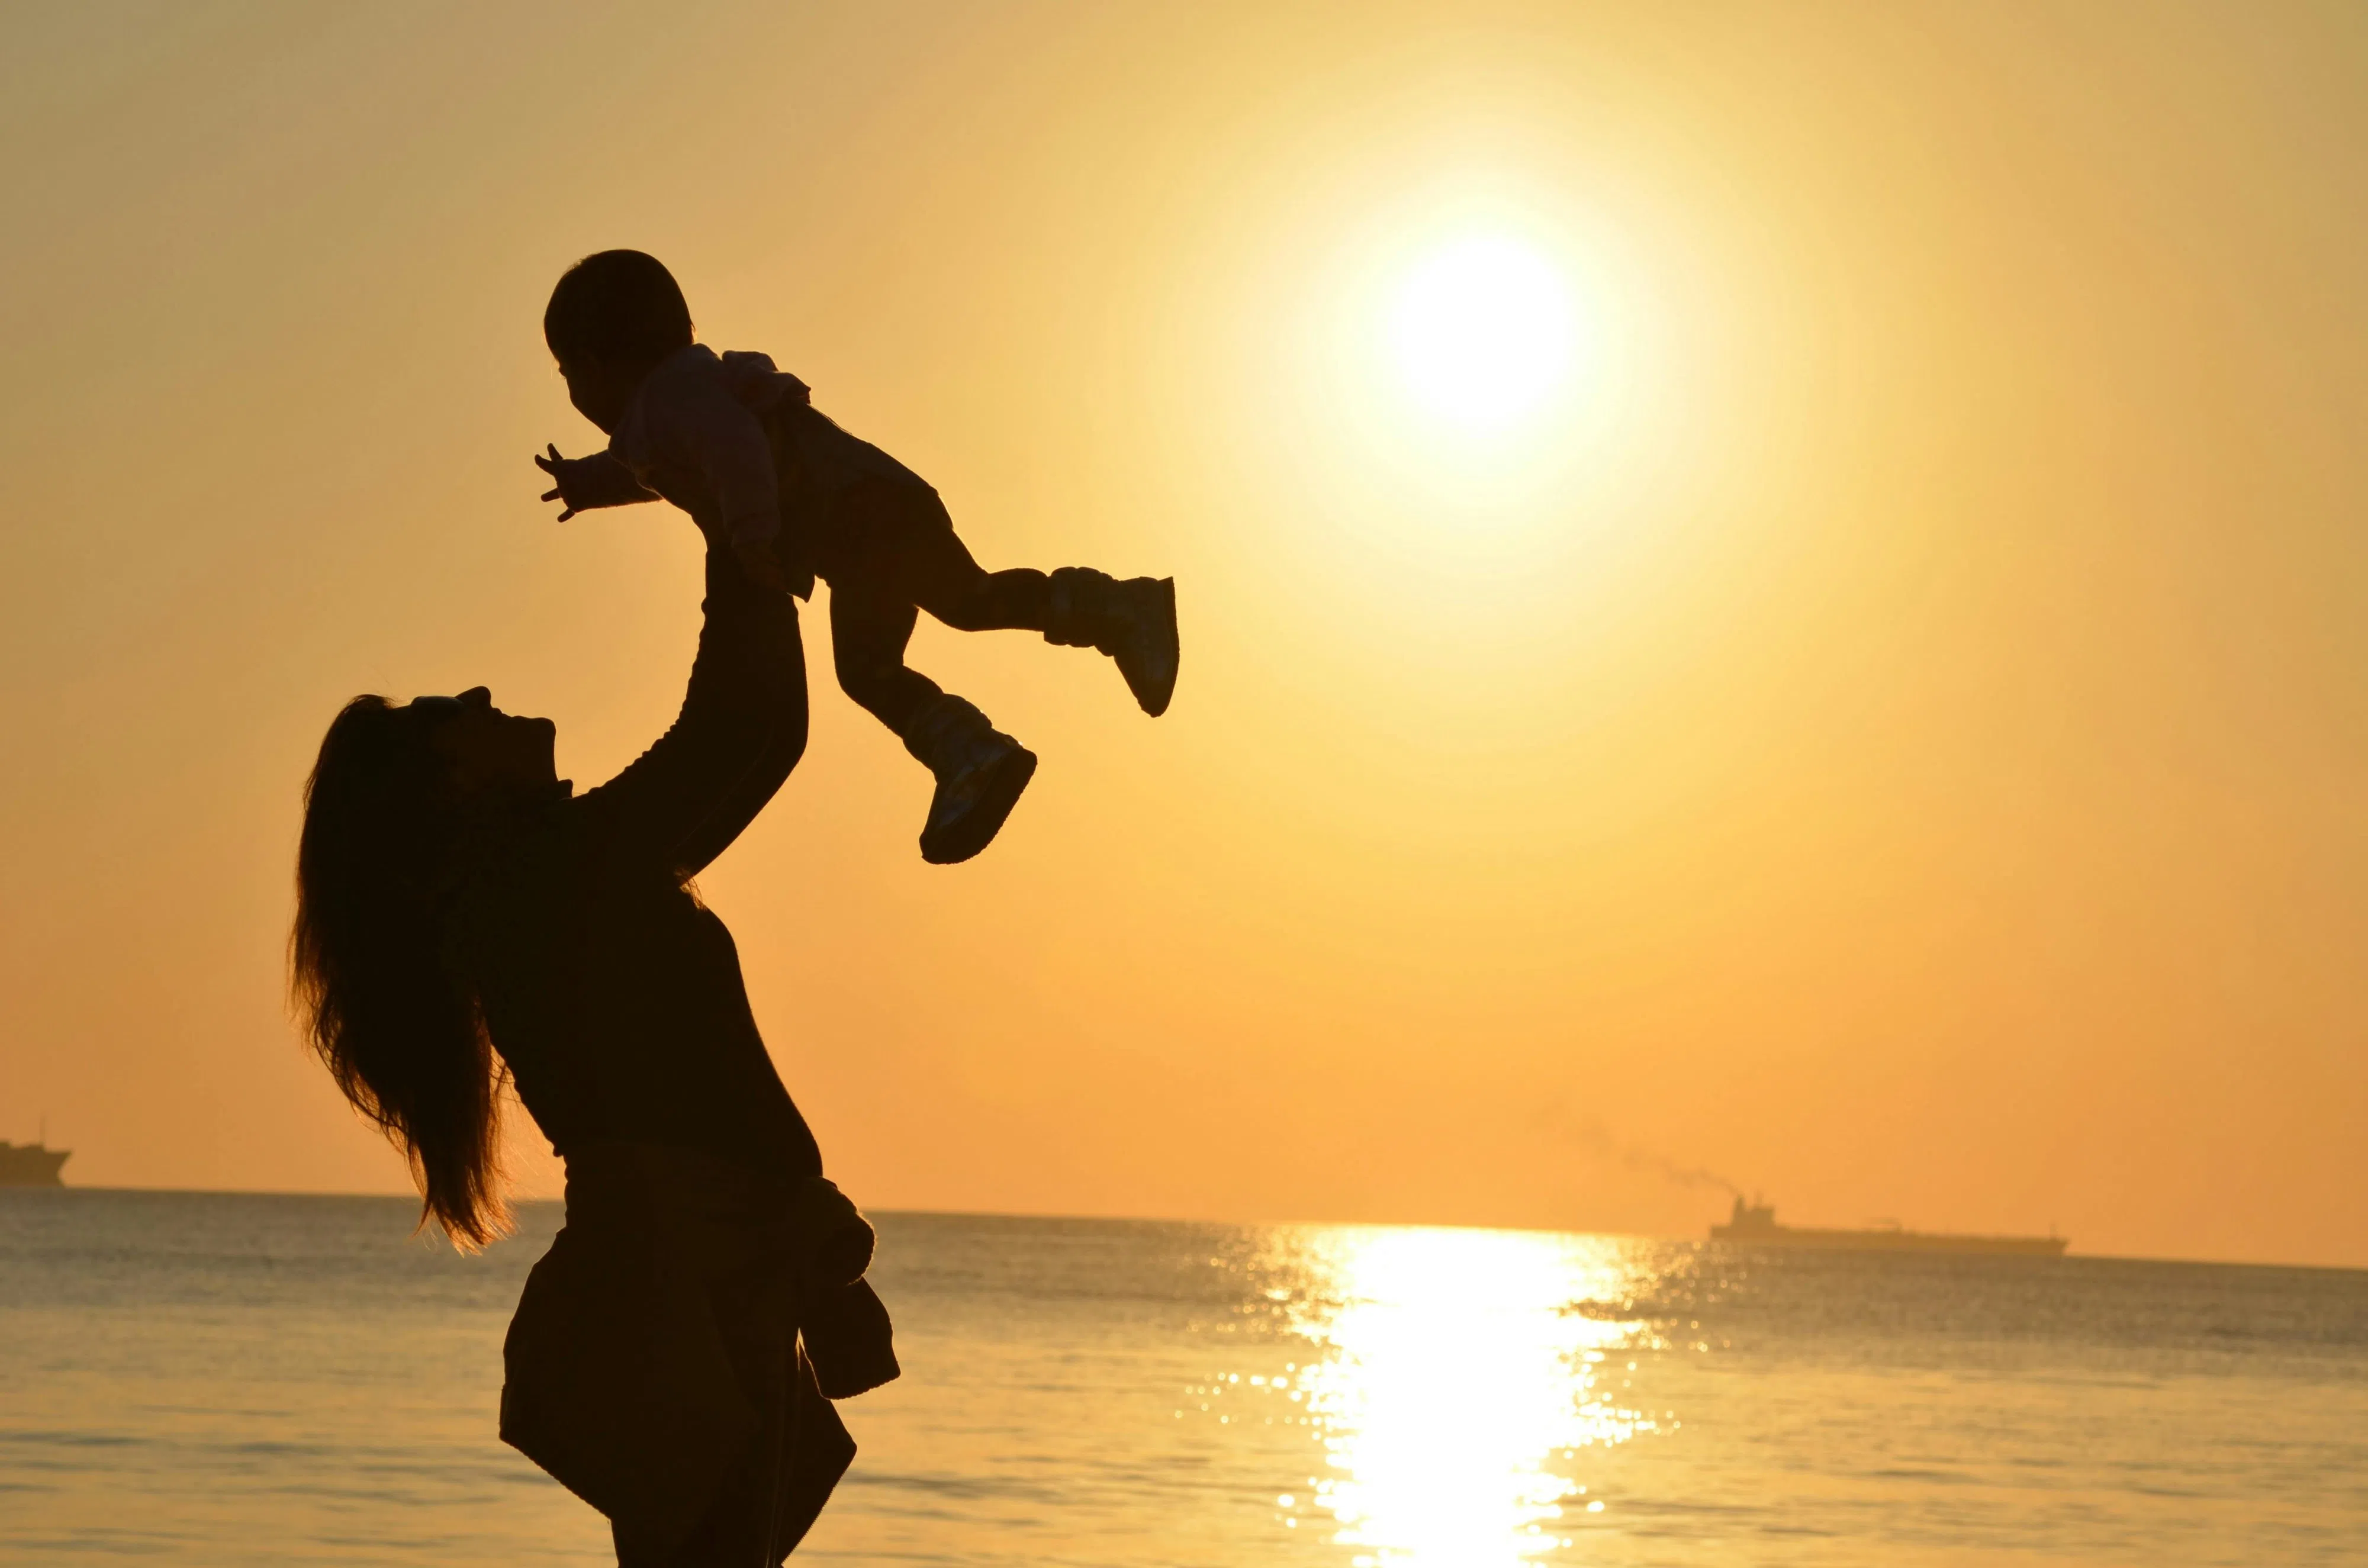 How to reach a simpler summer plan for divorced parents and kids, with Dr Julie Gowthorpe, RSW